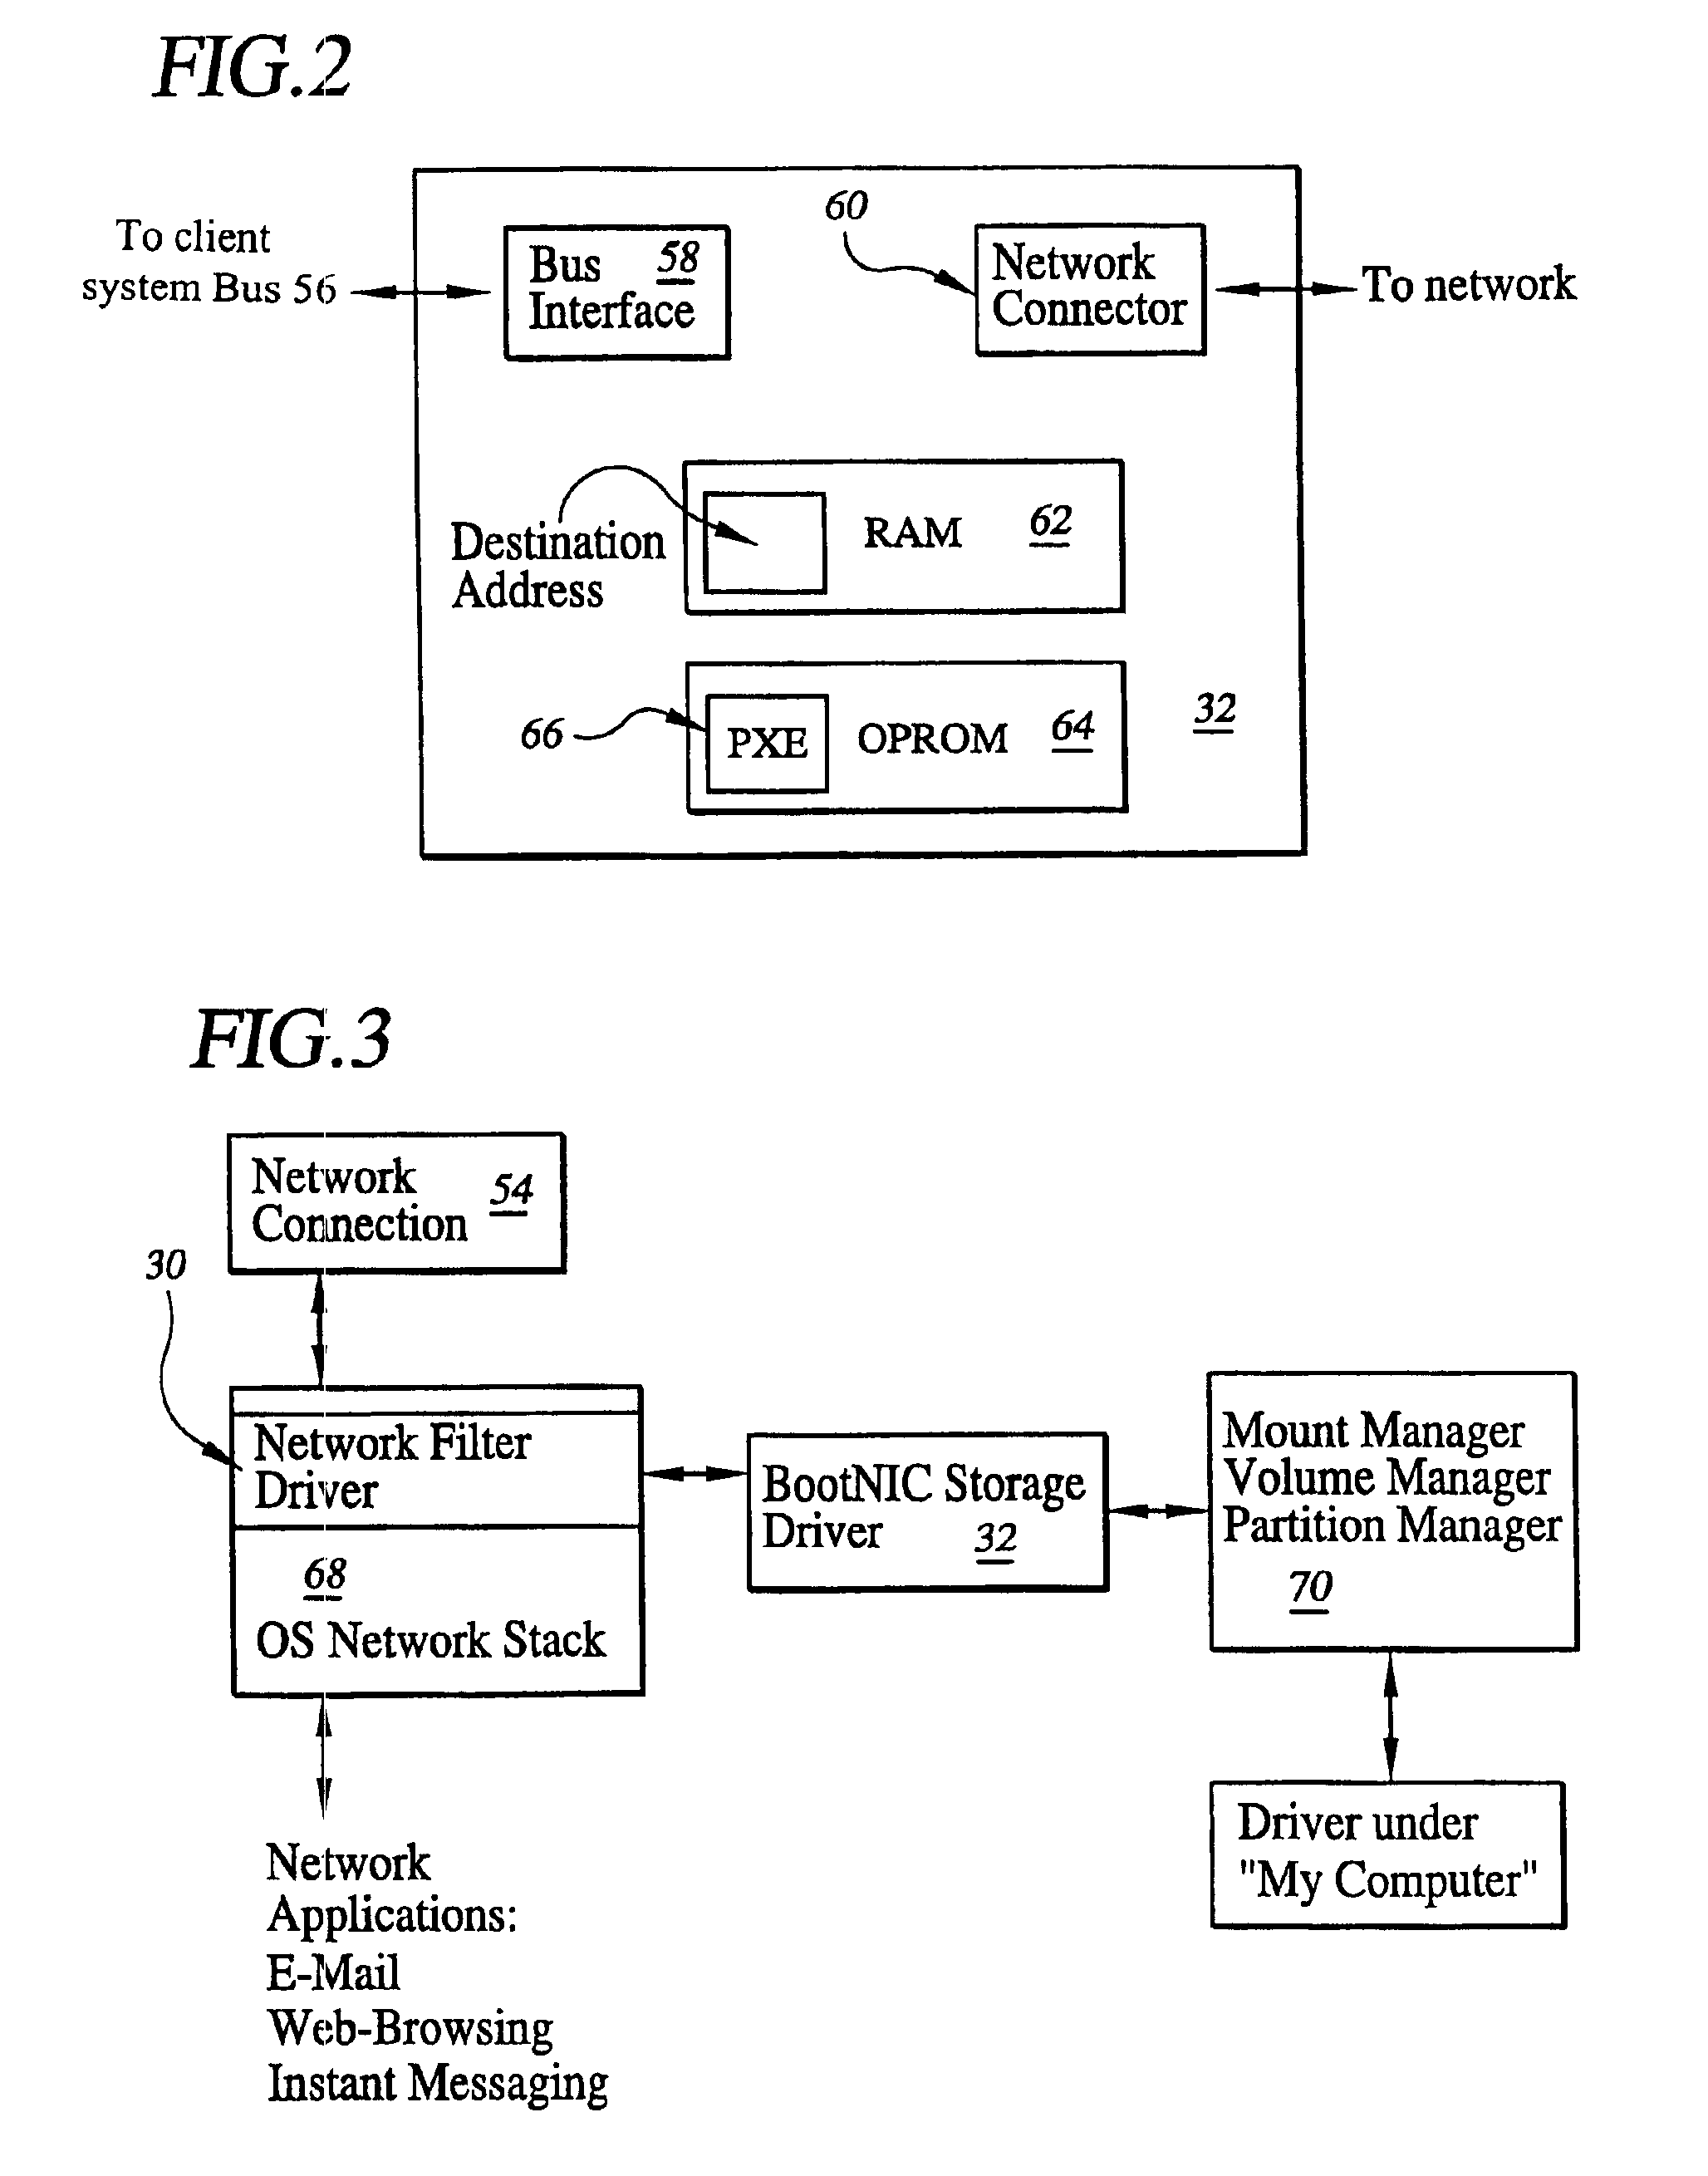 System for and method of network booting of an operating system to a client computer using hibernation